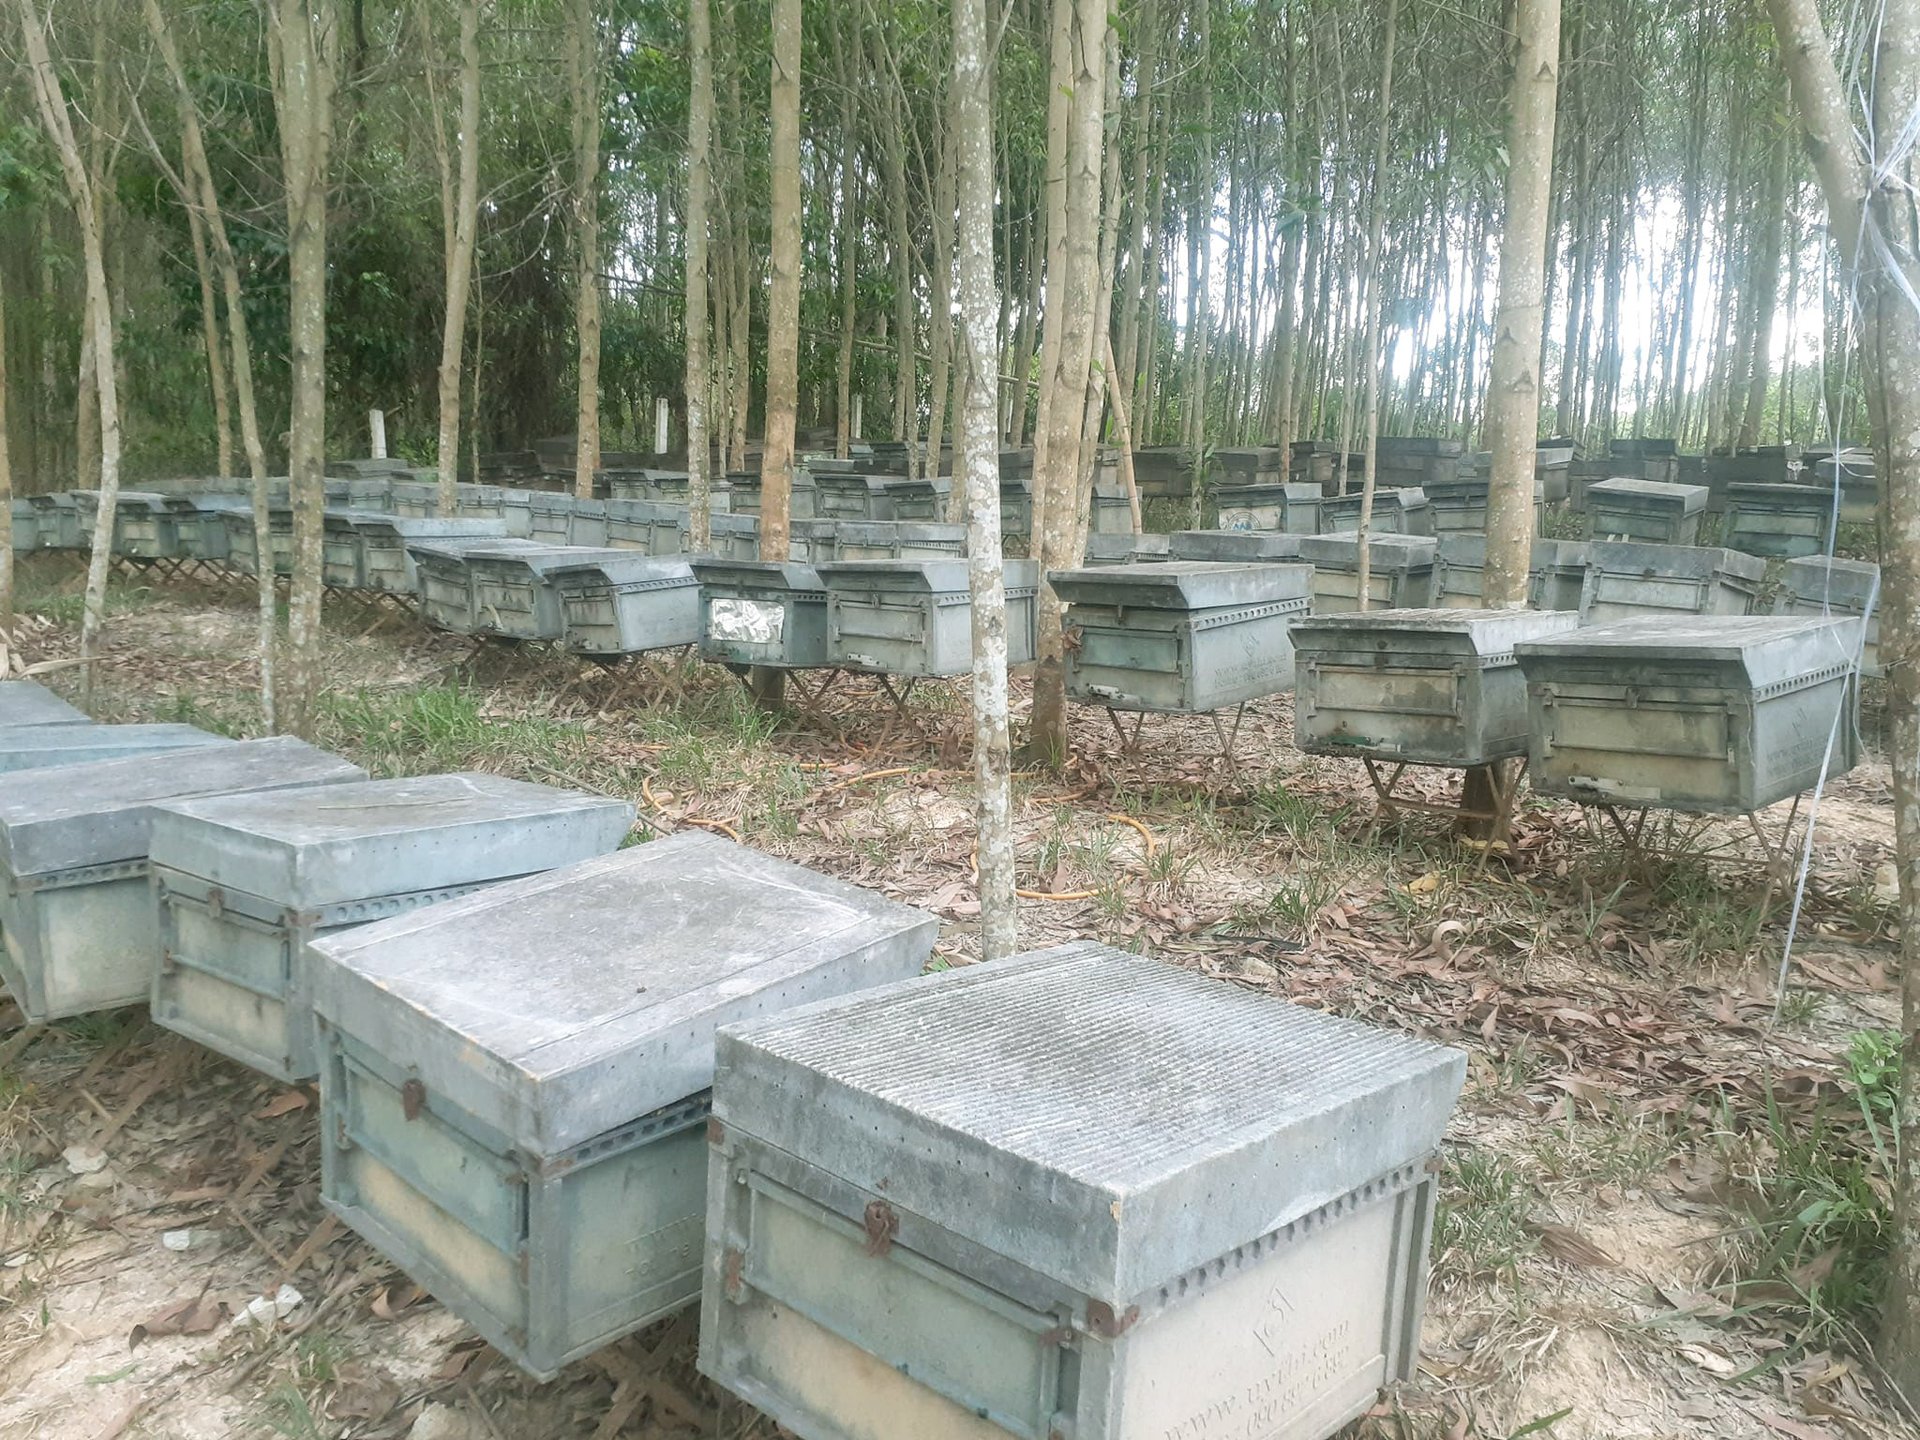 Nghe An with spiky acacia hills has created favorable conditions to attract farm beekeeping. Photo: Huy Thu.